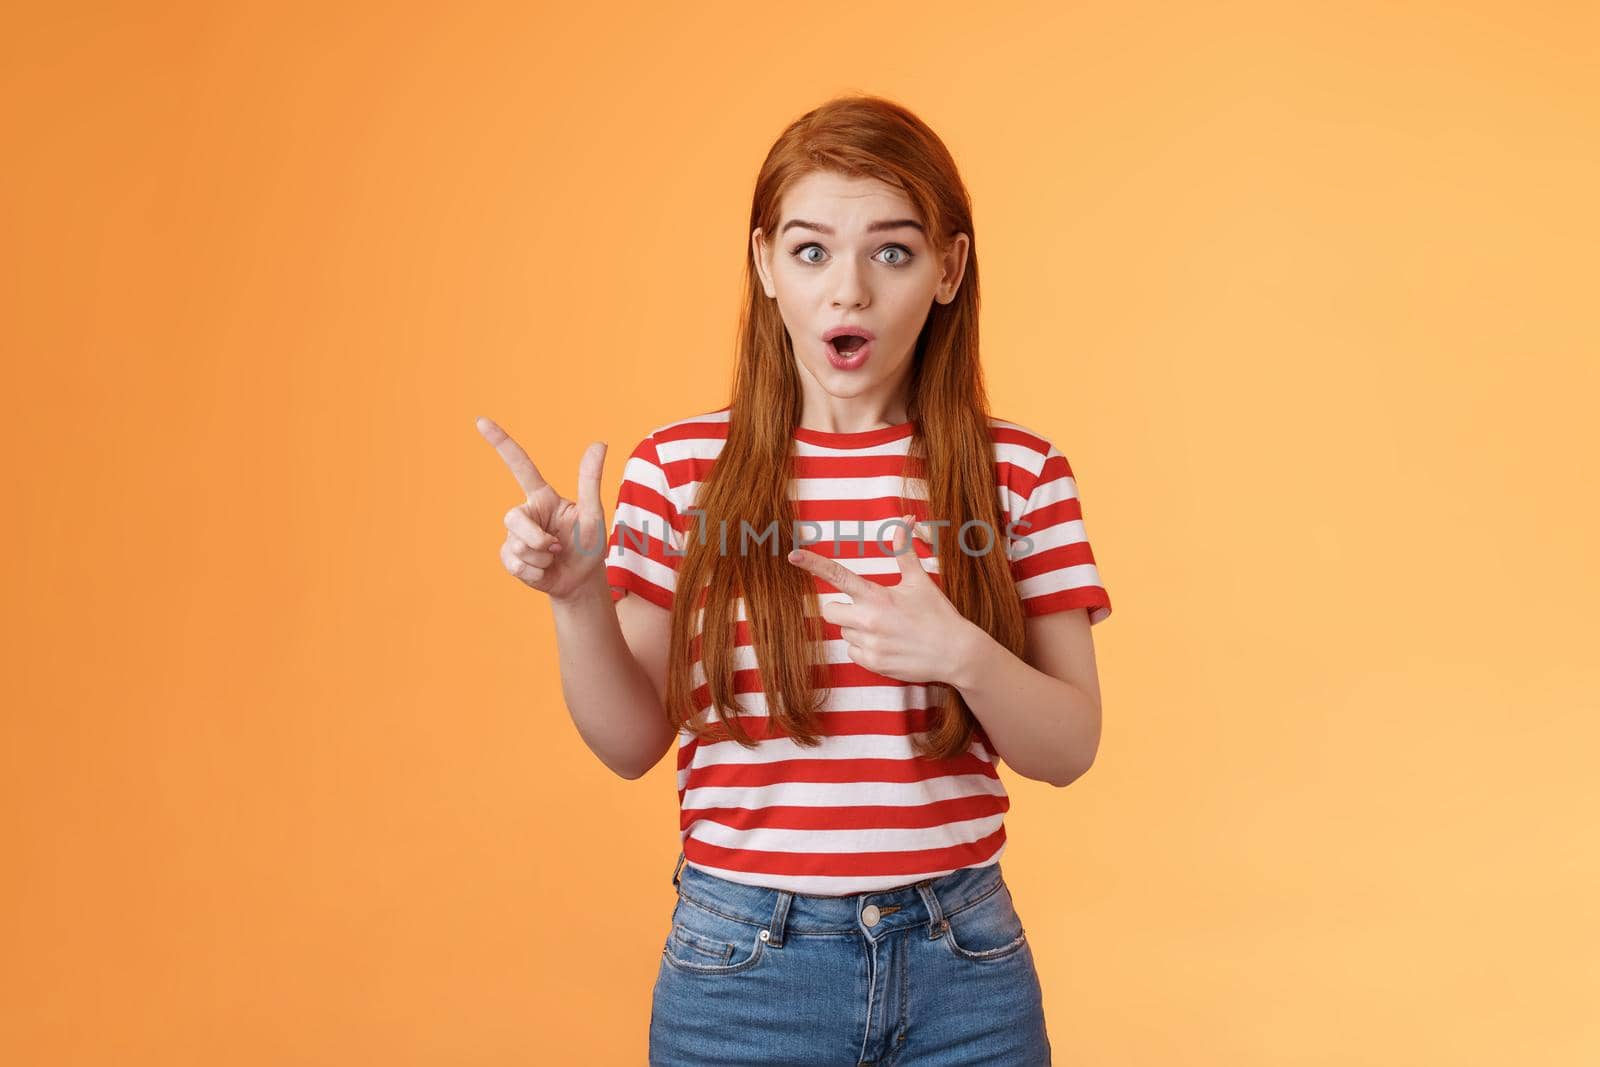 Wow awesome. Impressed excited beautiful redhead woman look astonished explain amazing news, stare camera thrilled talking about advertisement, pointing left upbeat impressed, orange background.